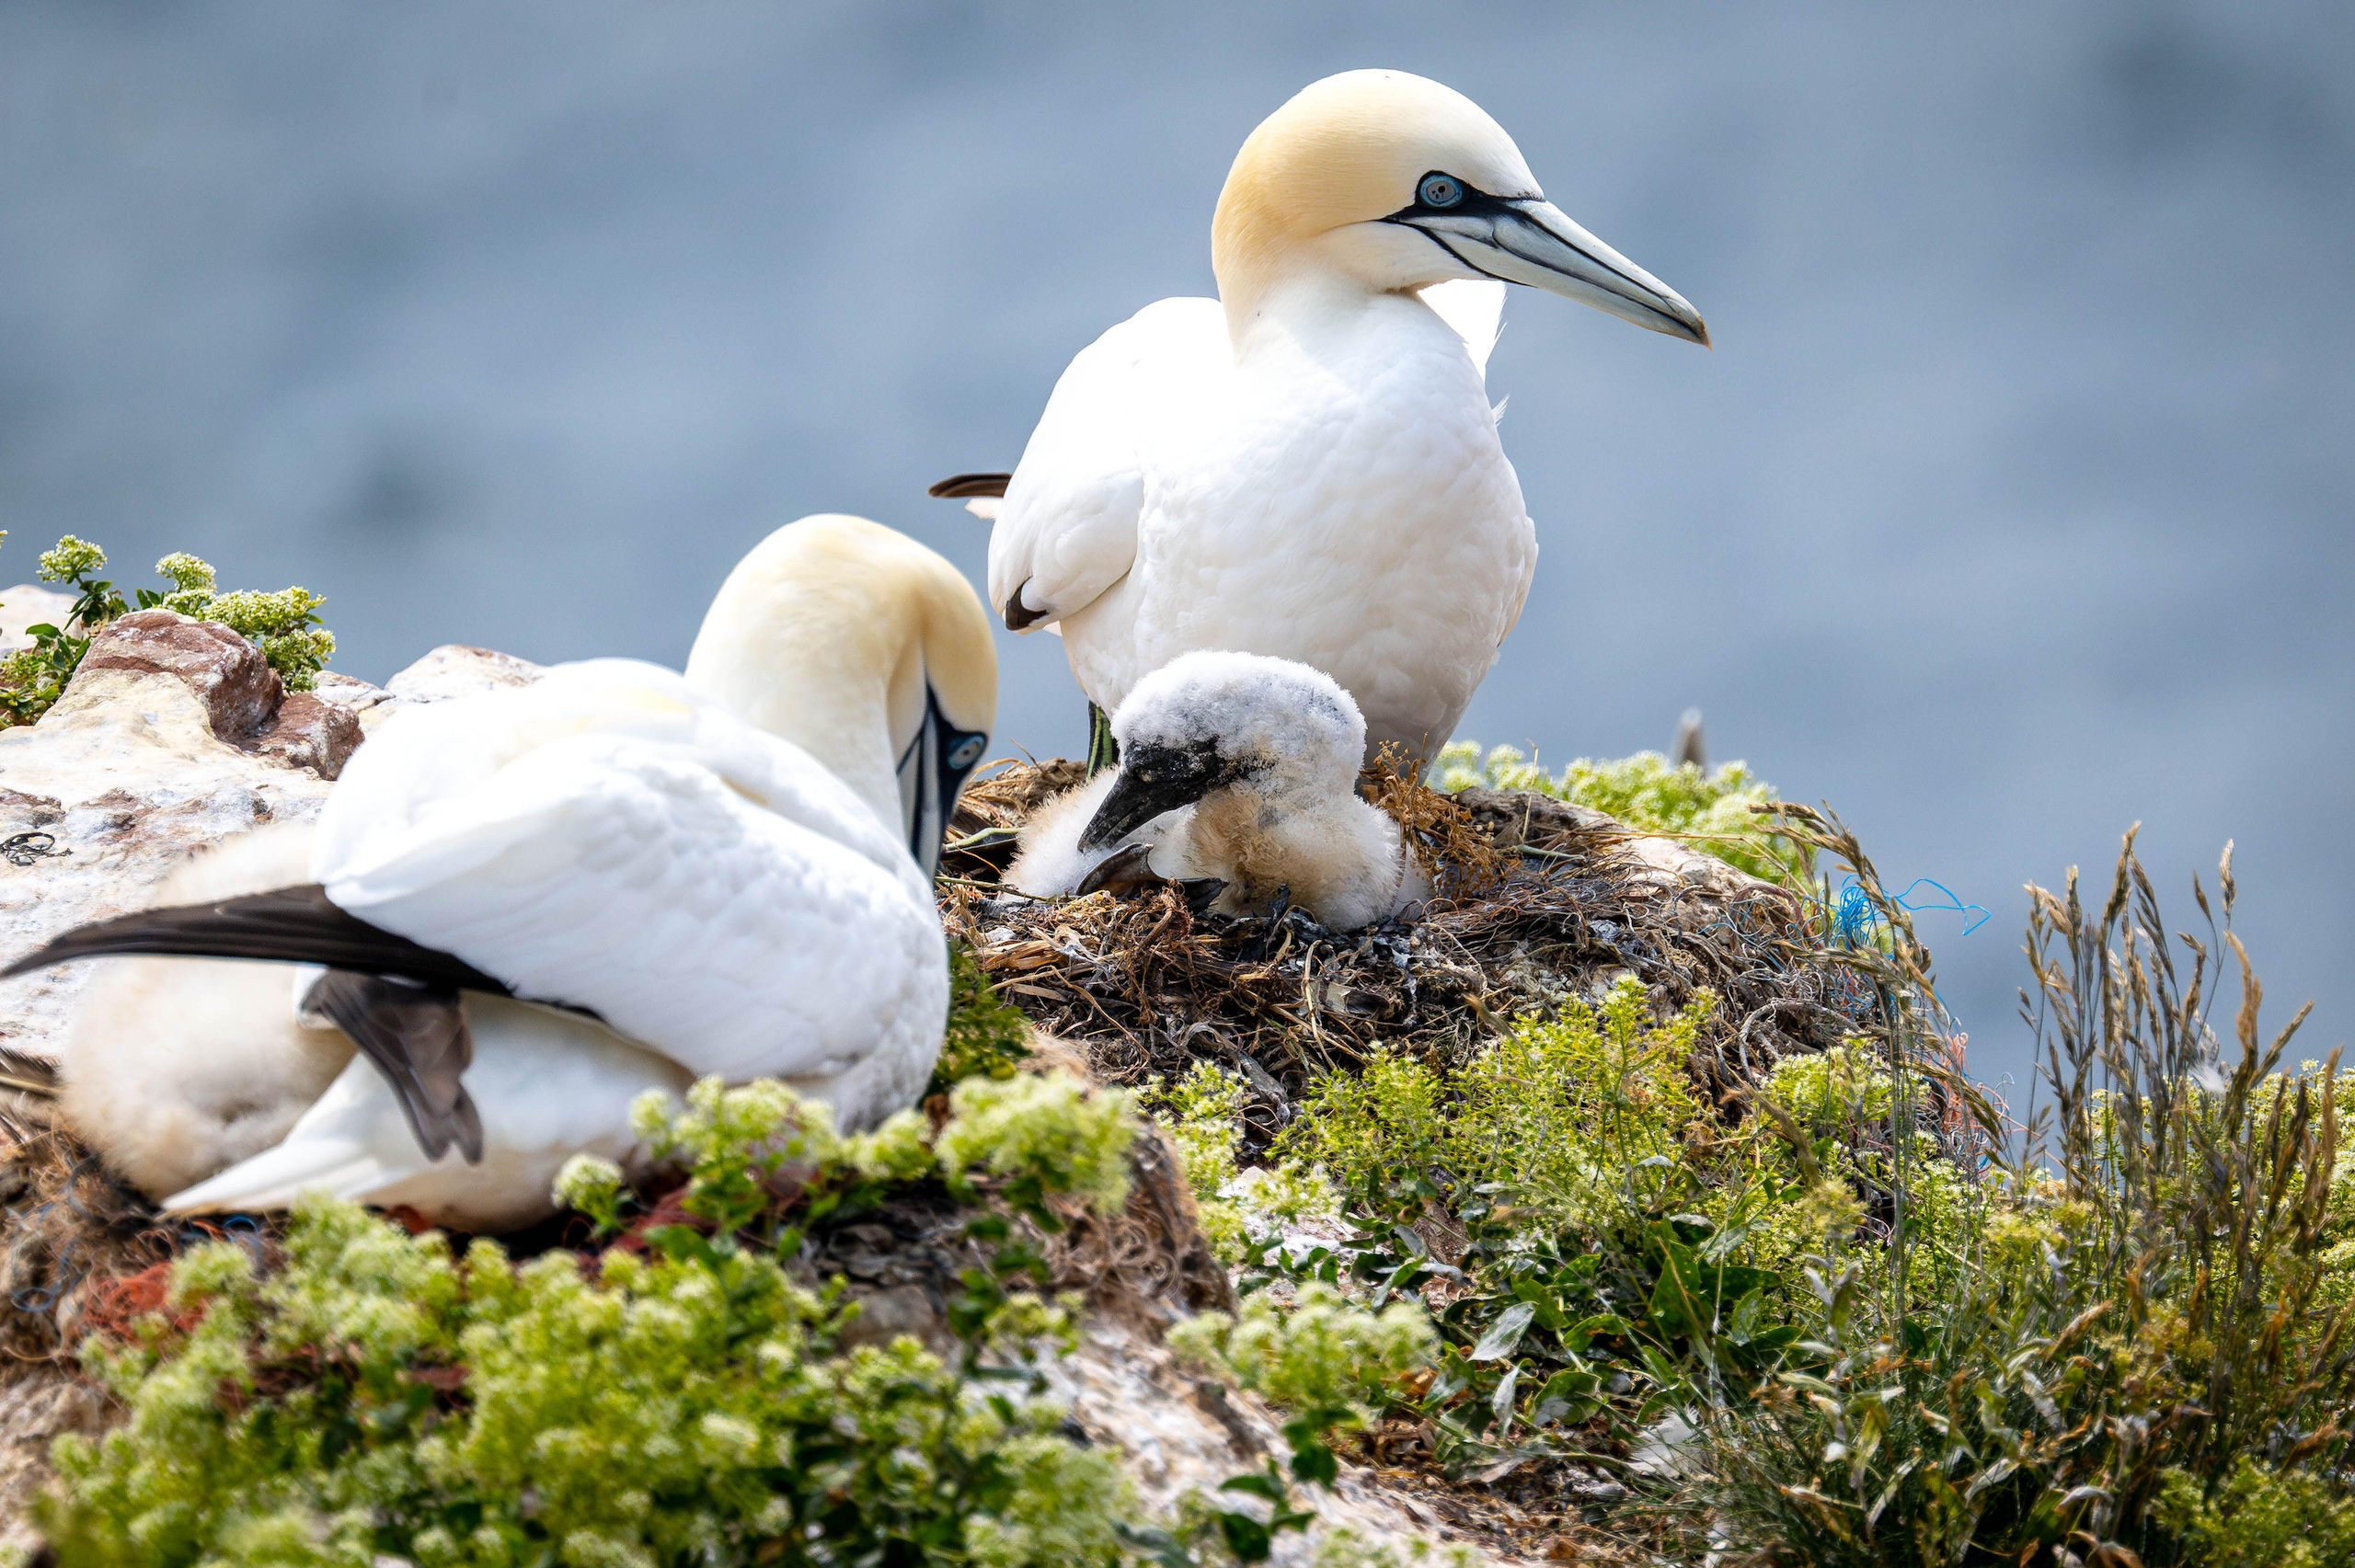 <p>Gannets nesting on the Heligoland islands in the North Sea near Germany. Migratory seabirds may be helping avian flu to spread around the world and between species. (Image: Sina Schuldt / Alamy)</p>